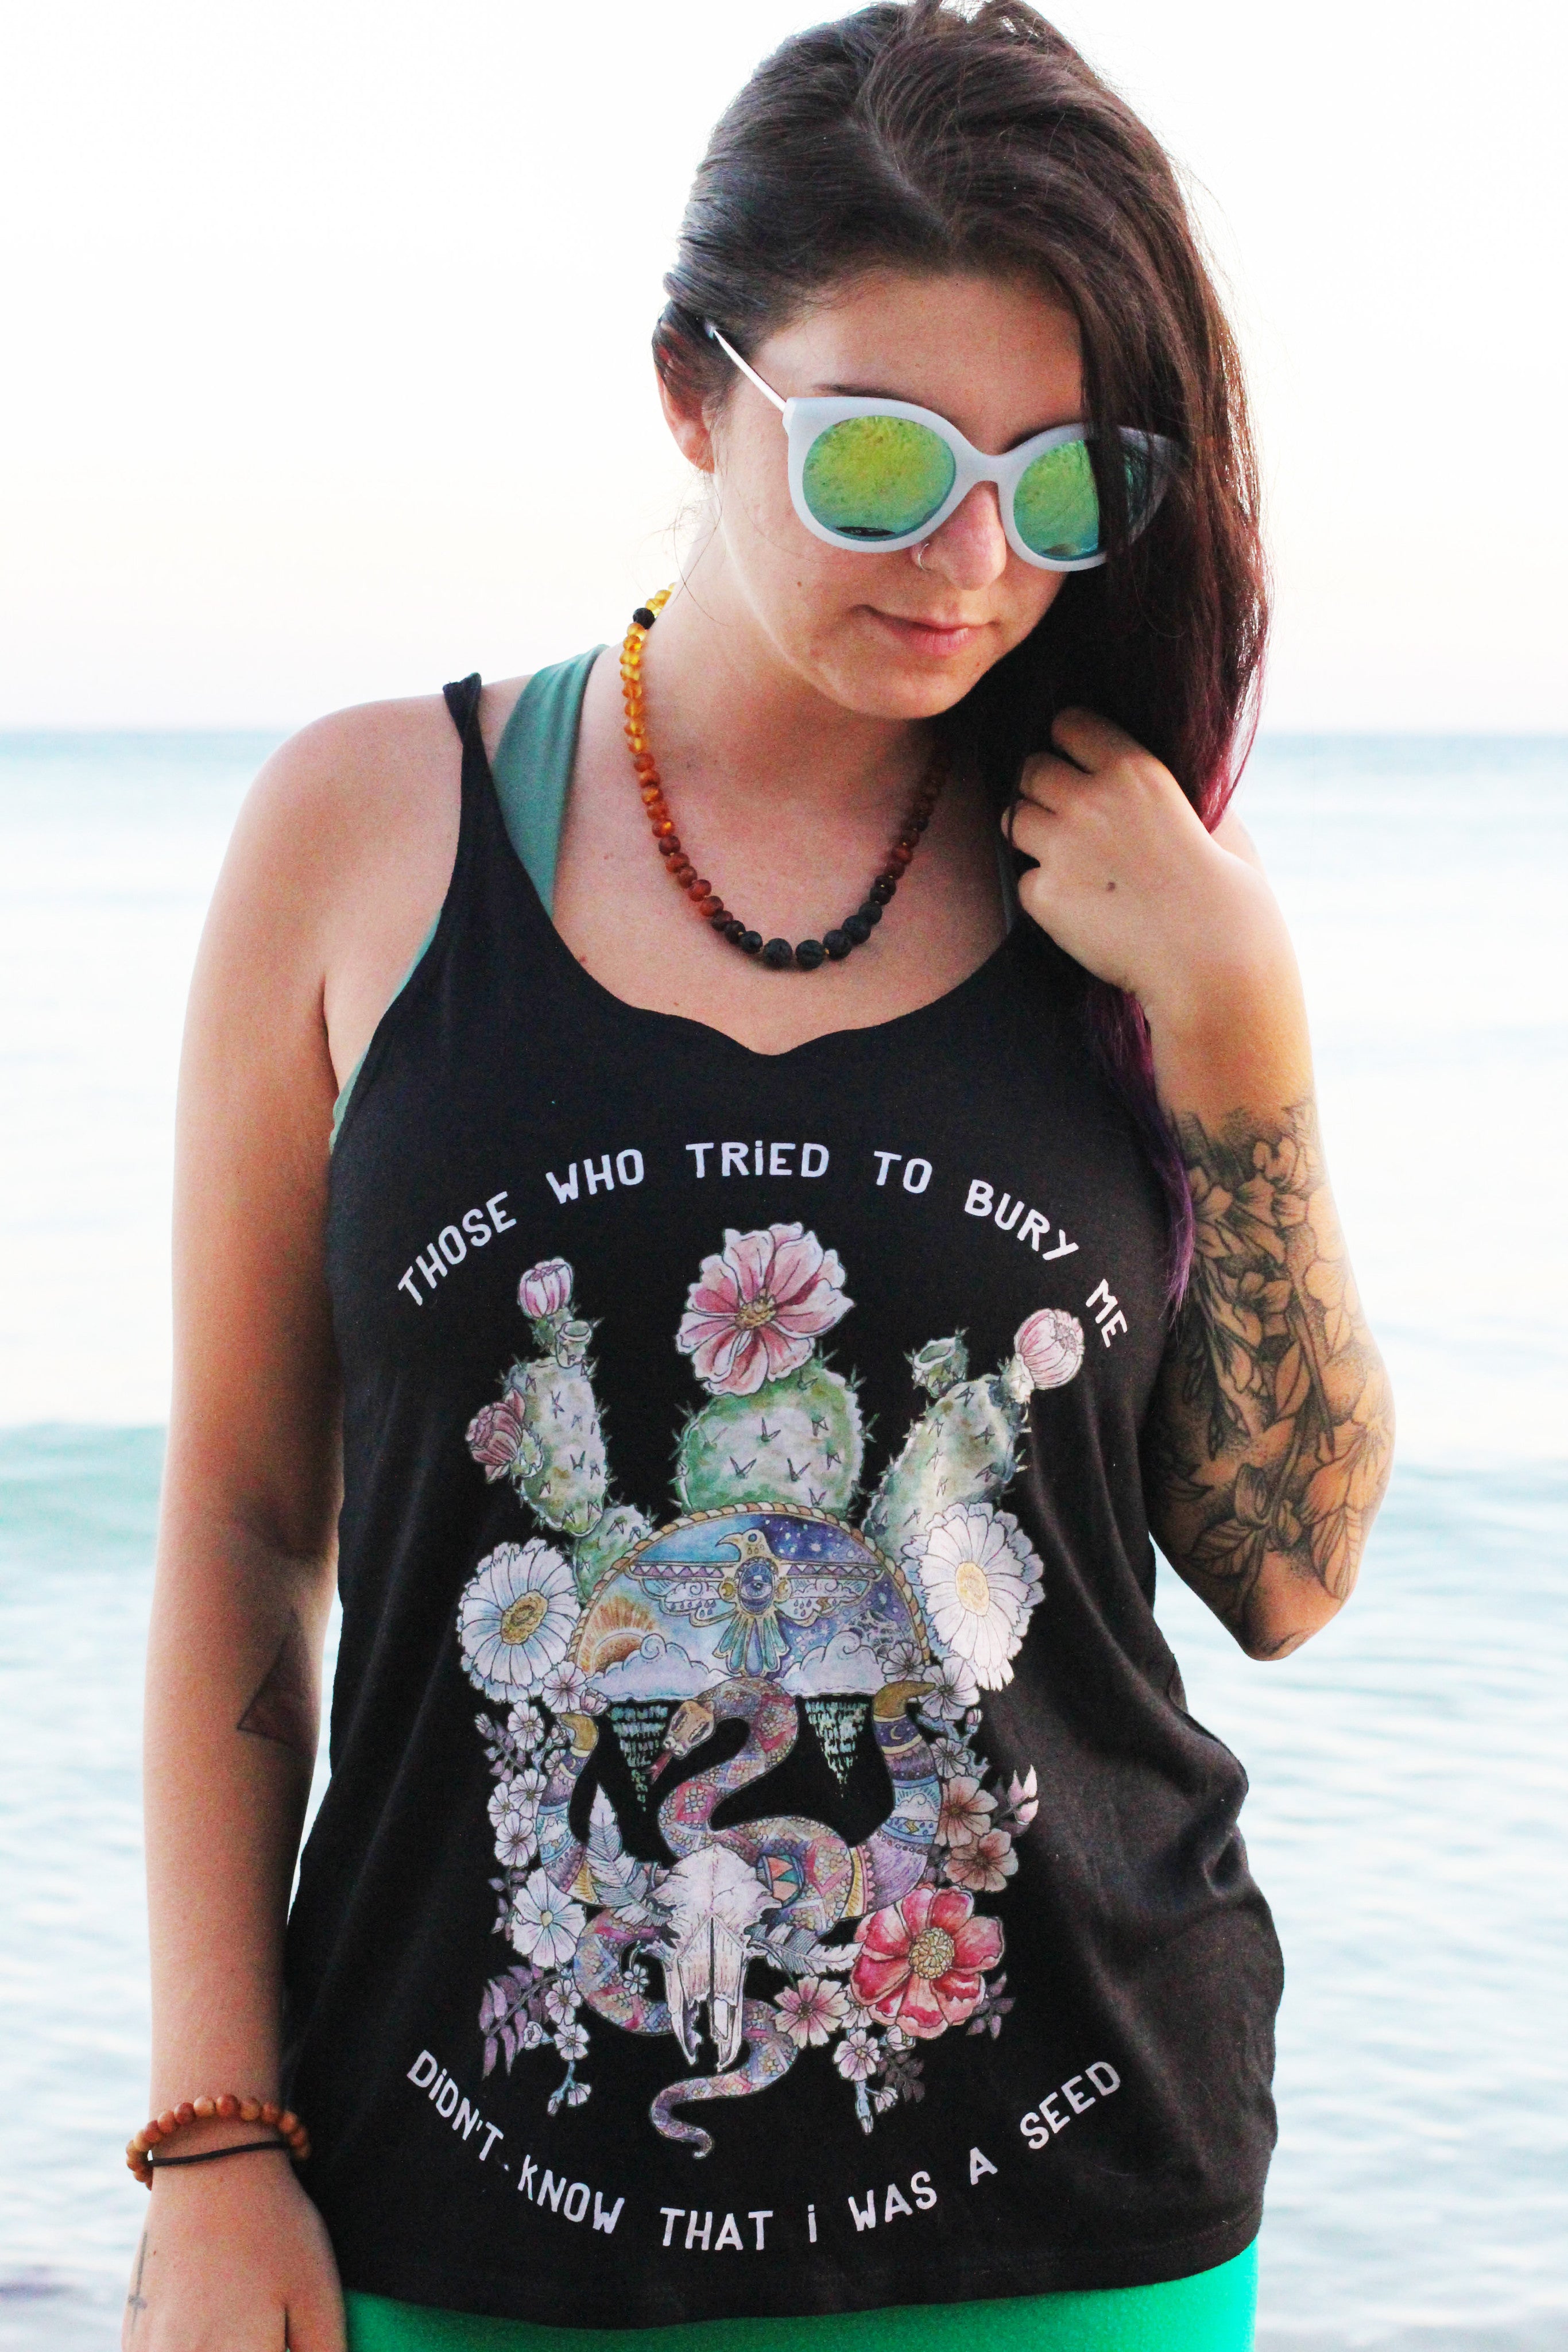 « THOSE WHO TRIED TO BURY ME DIDN'T KNOW THAT I WAS A SEED » WOMEN'S SLOUCHY TANK